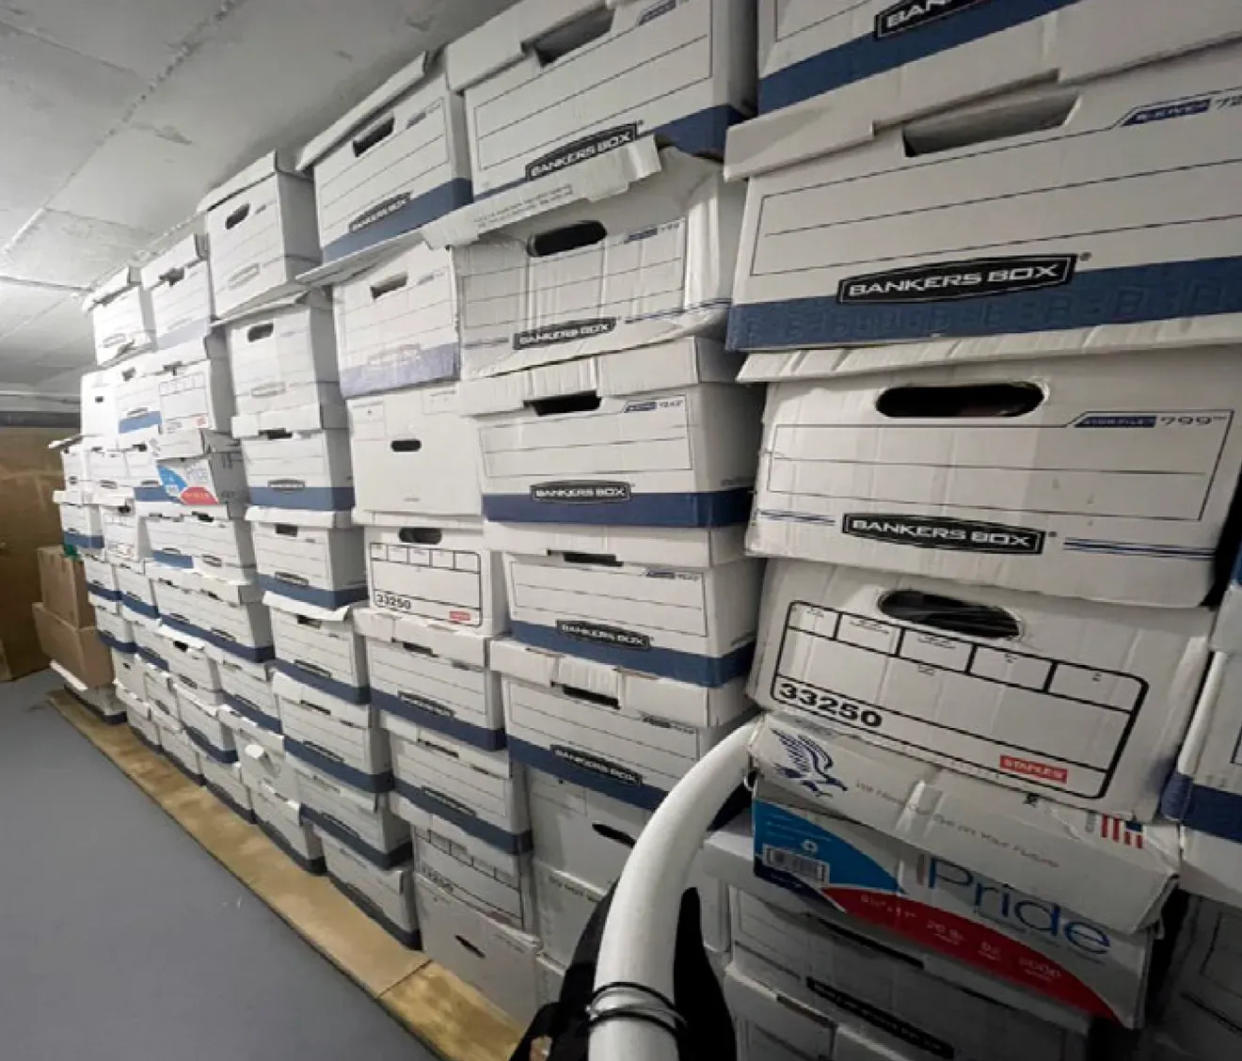 Boxes of U.S. government records are stacked in a storage room at Mar-a-Lago, Donald Trump's estate in Palm Beach. Photo taken in 2021.